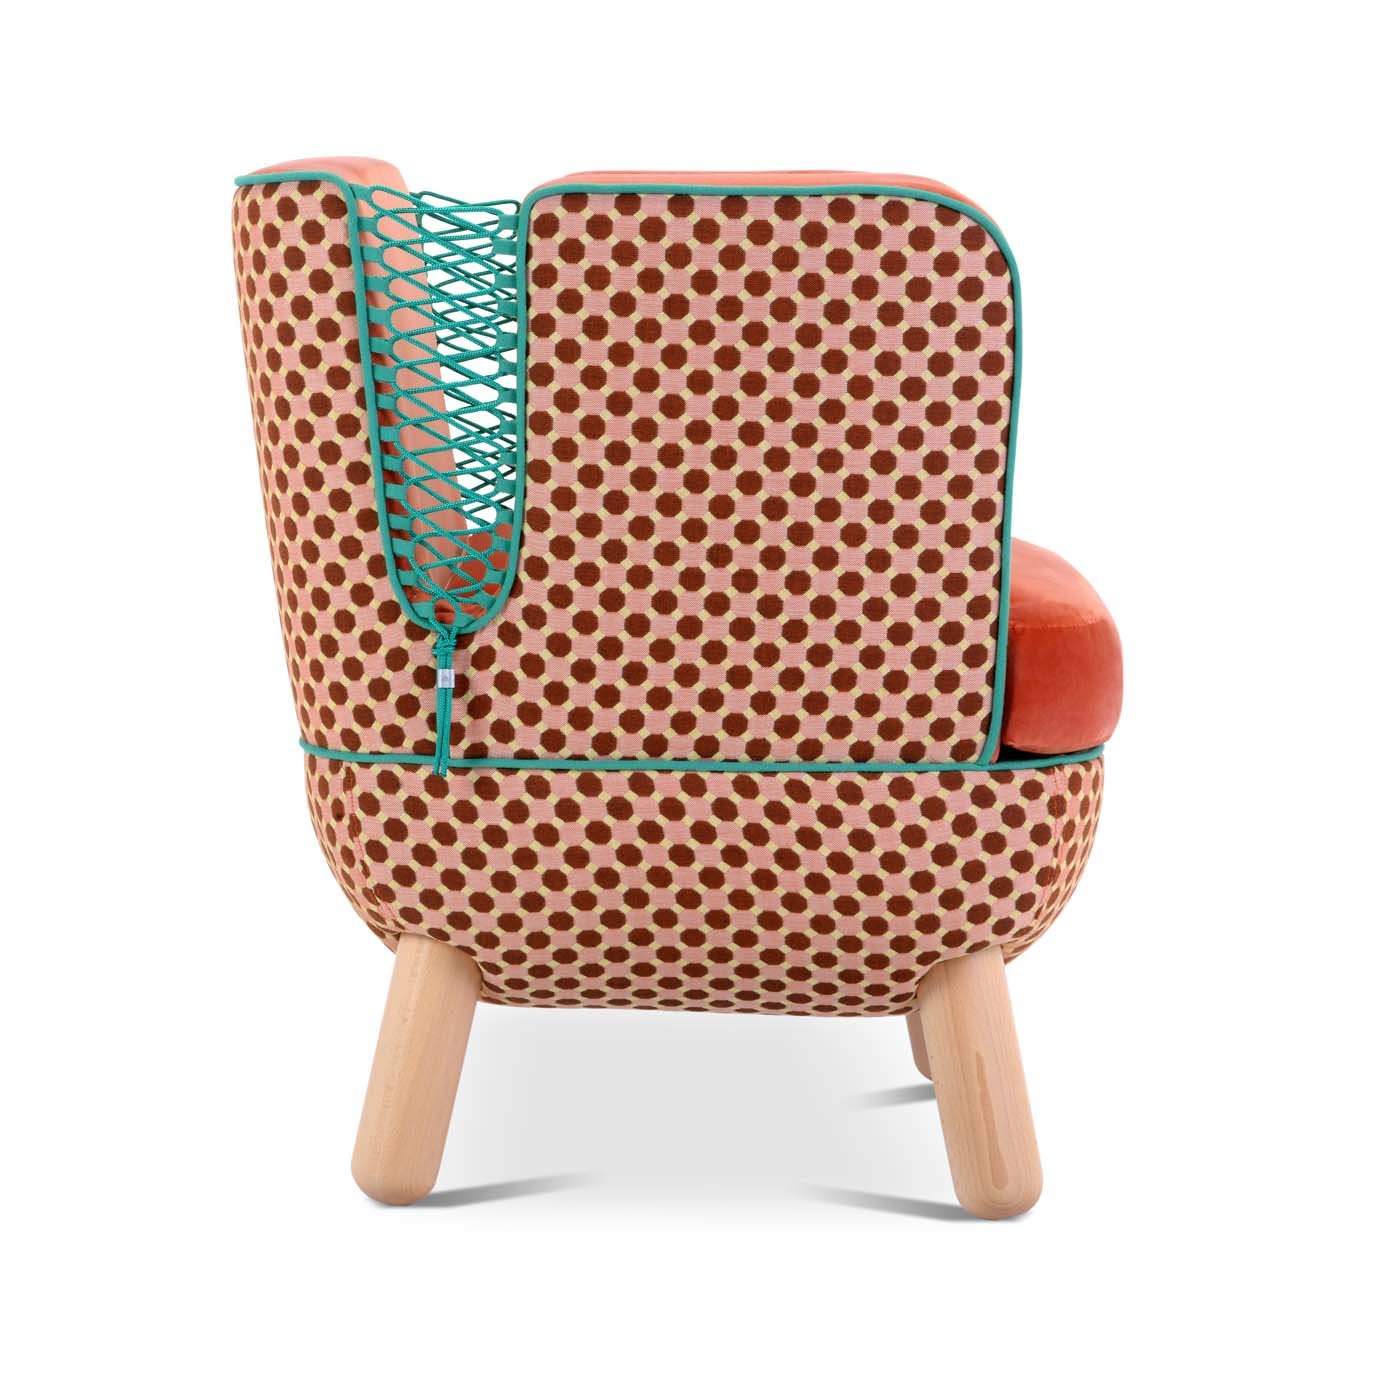 Sly Low Armchair with Ropes By Italo Pertichini rombi - Alternative view 2